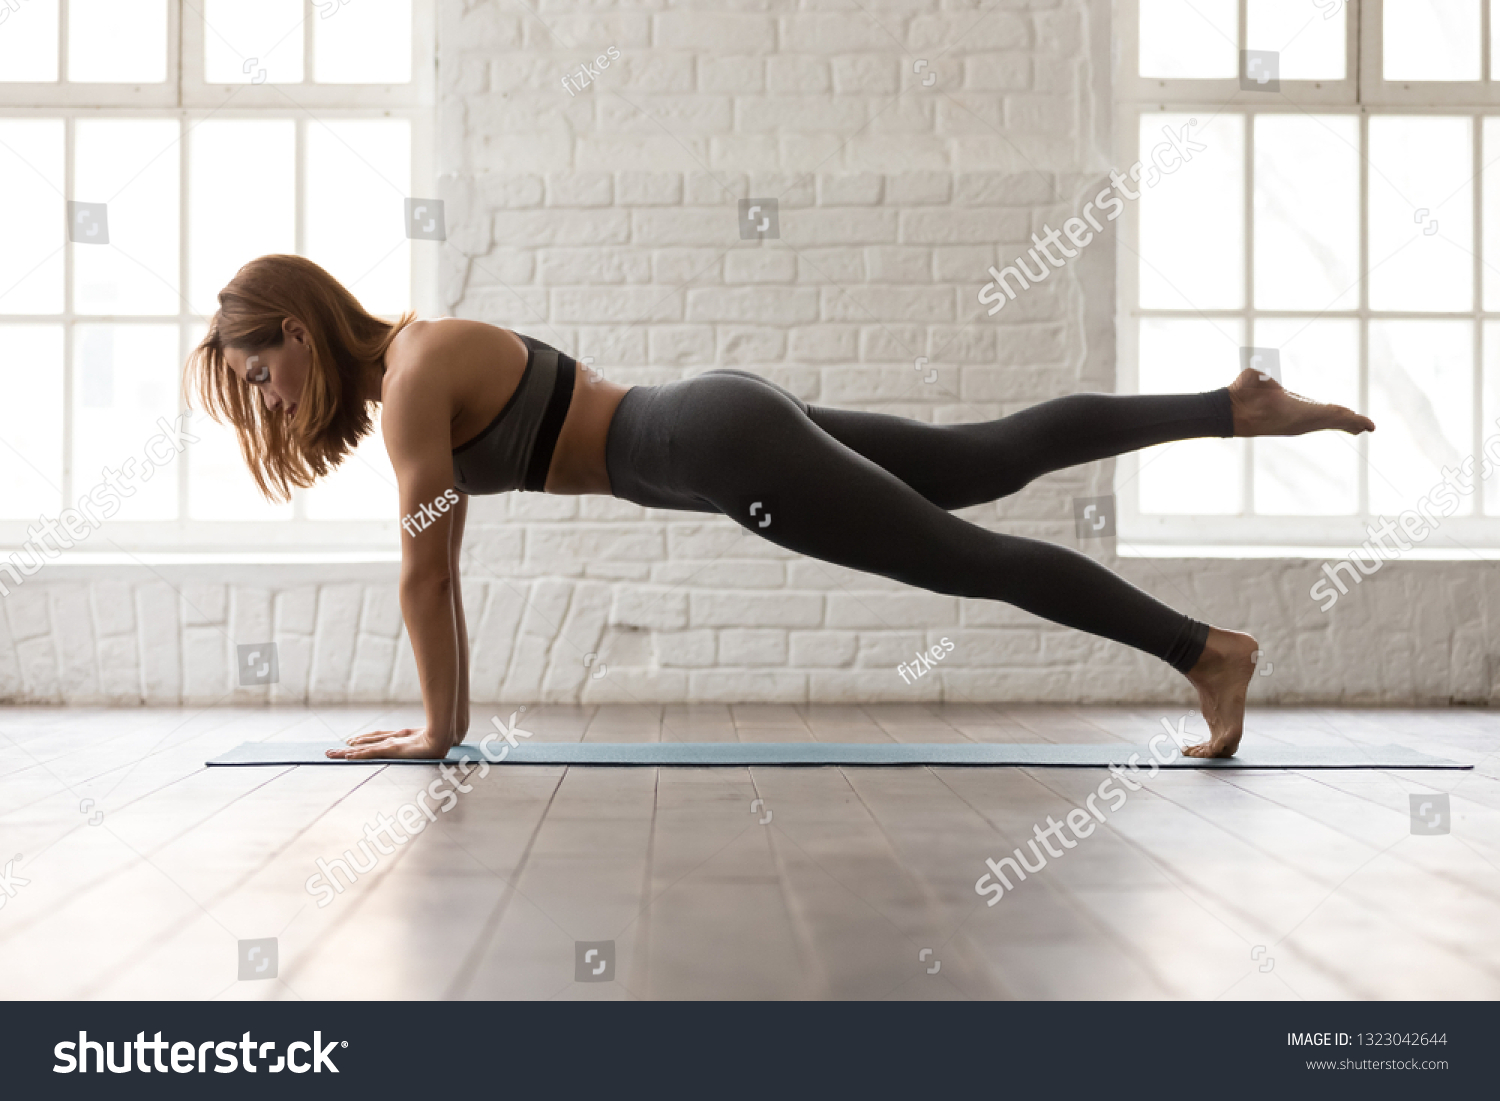 Sporty woman in grey sportswear, bra and leggings practicing yoga, doing Push ups or press ups exercise, phalankasana, variation of Plank pose, beautiful girl working out at home or in yoga studio #1323042644